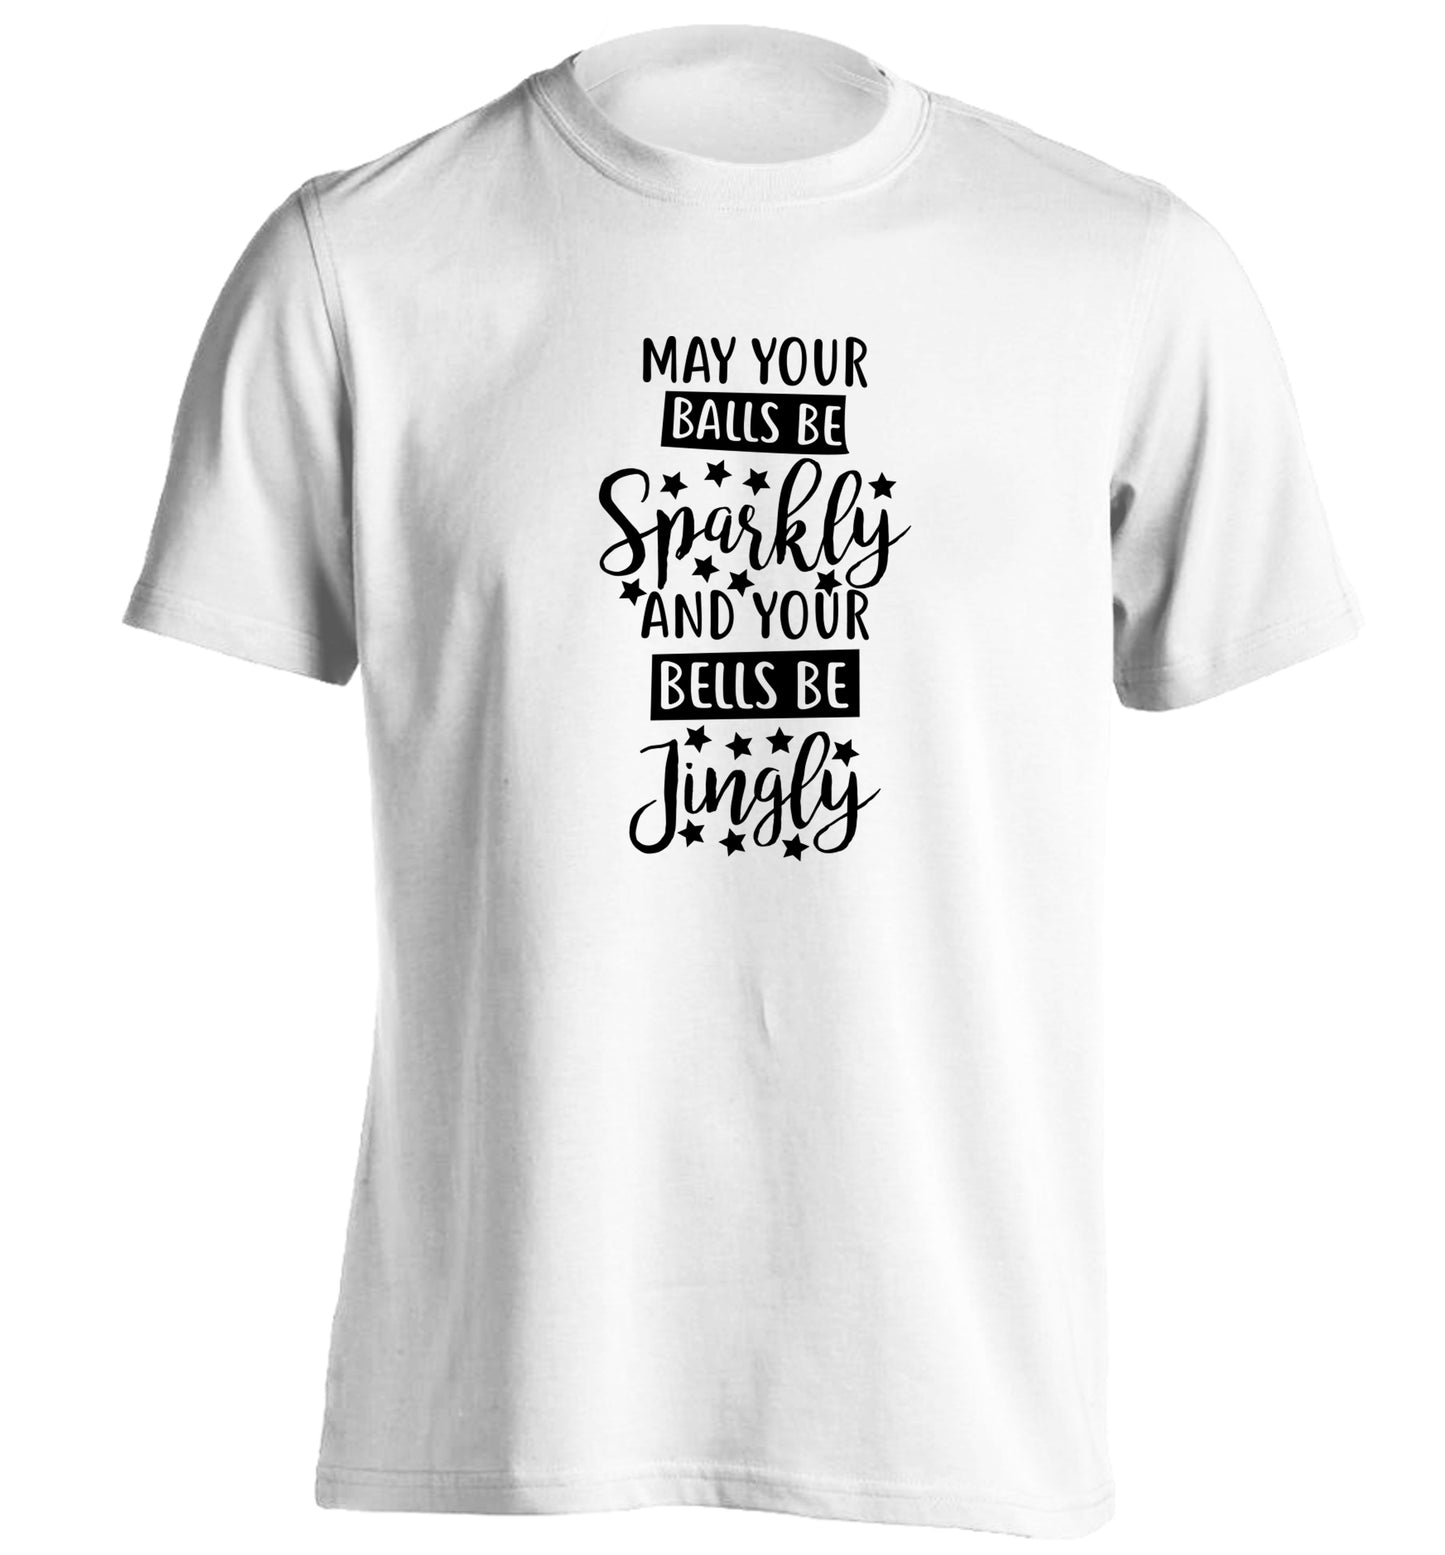 May your balls be sparkly and your bells be jingly adults unisex white Tshirt 2XL